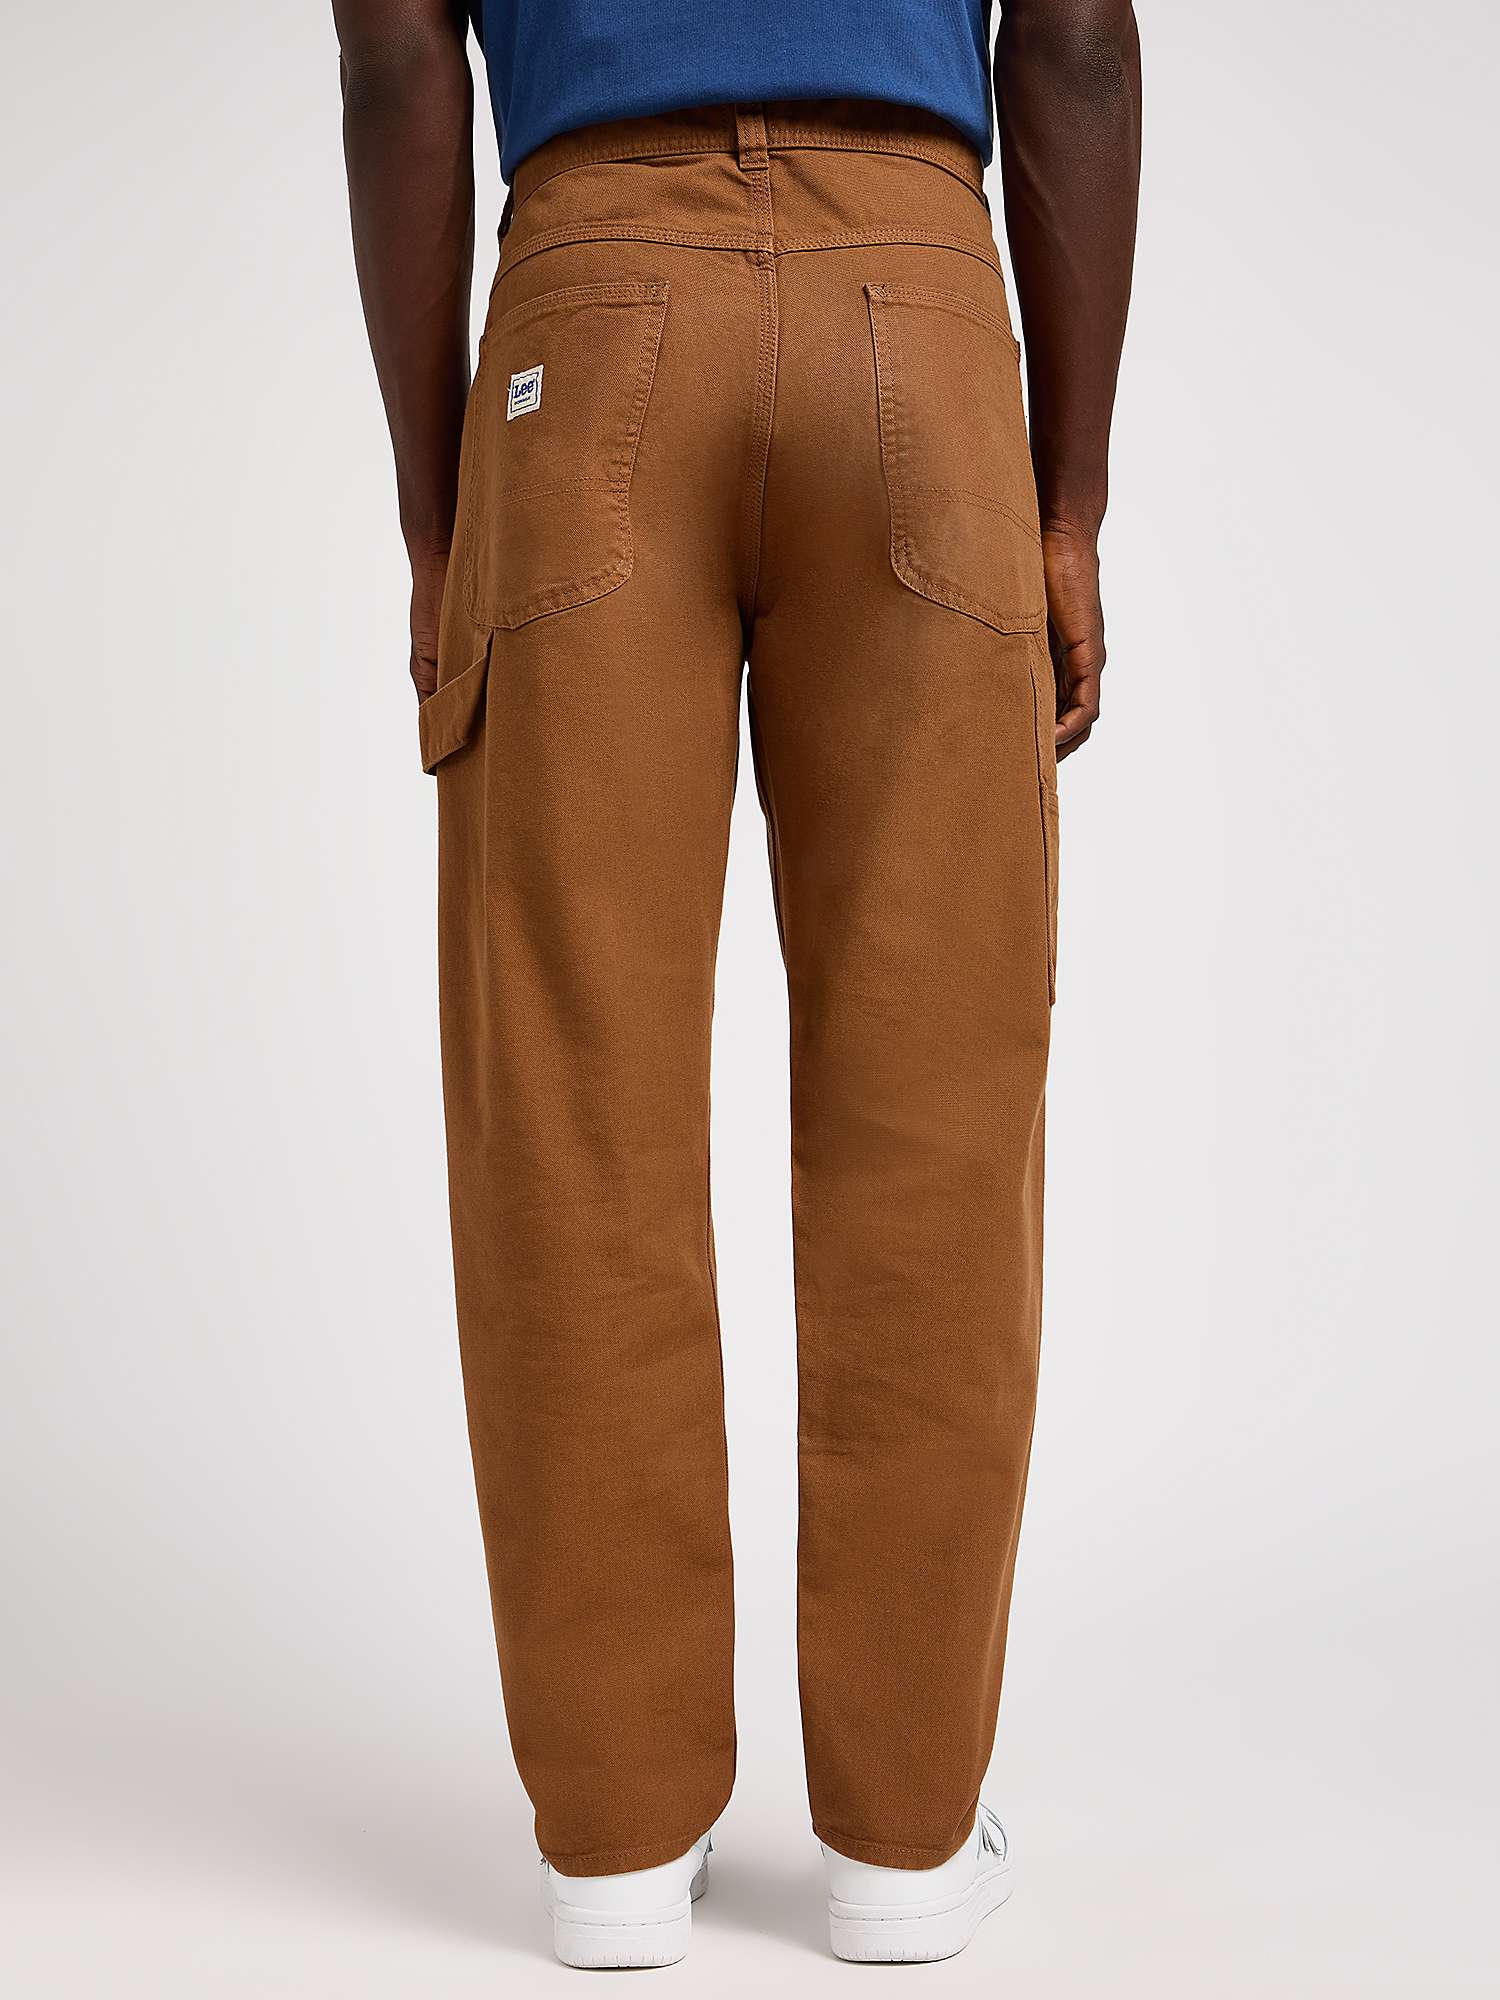 Buy Lee Carpenter Relaxed Fit Trousers, Brown Online at johnlewis.com